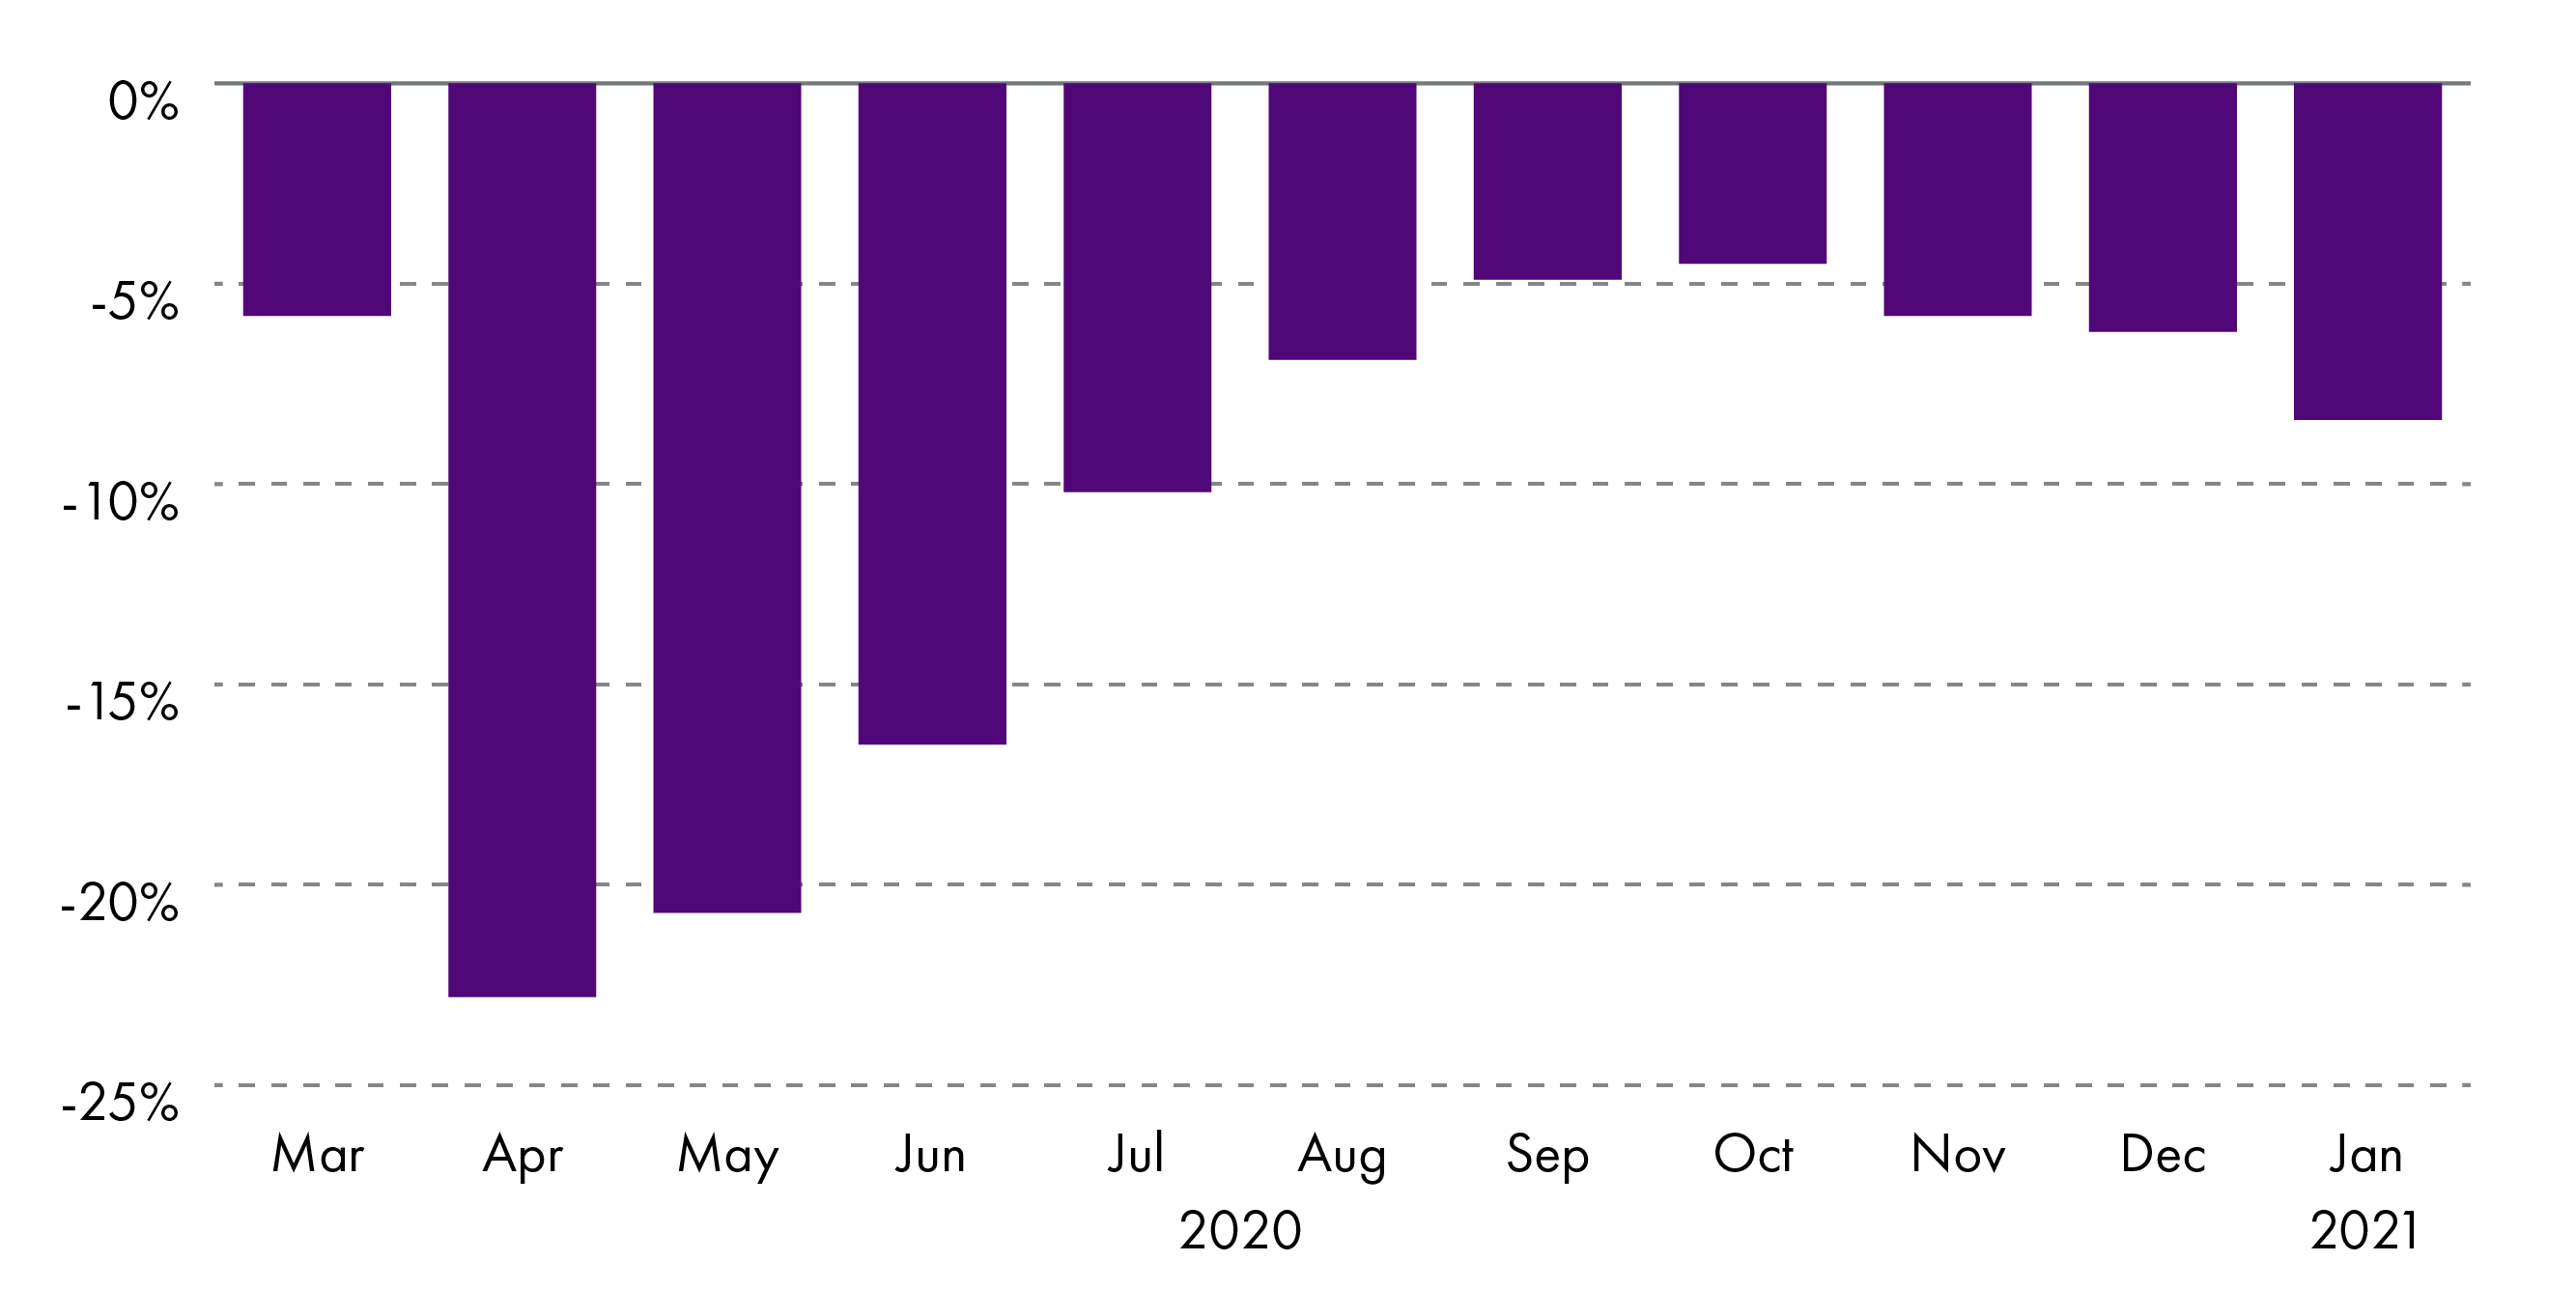 In April 2020, GDP had fallen by almost 23% before gradually improving over the year to -8.4% in January 2021.